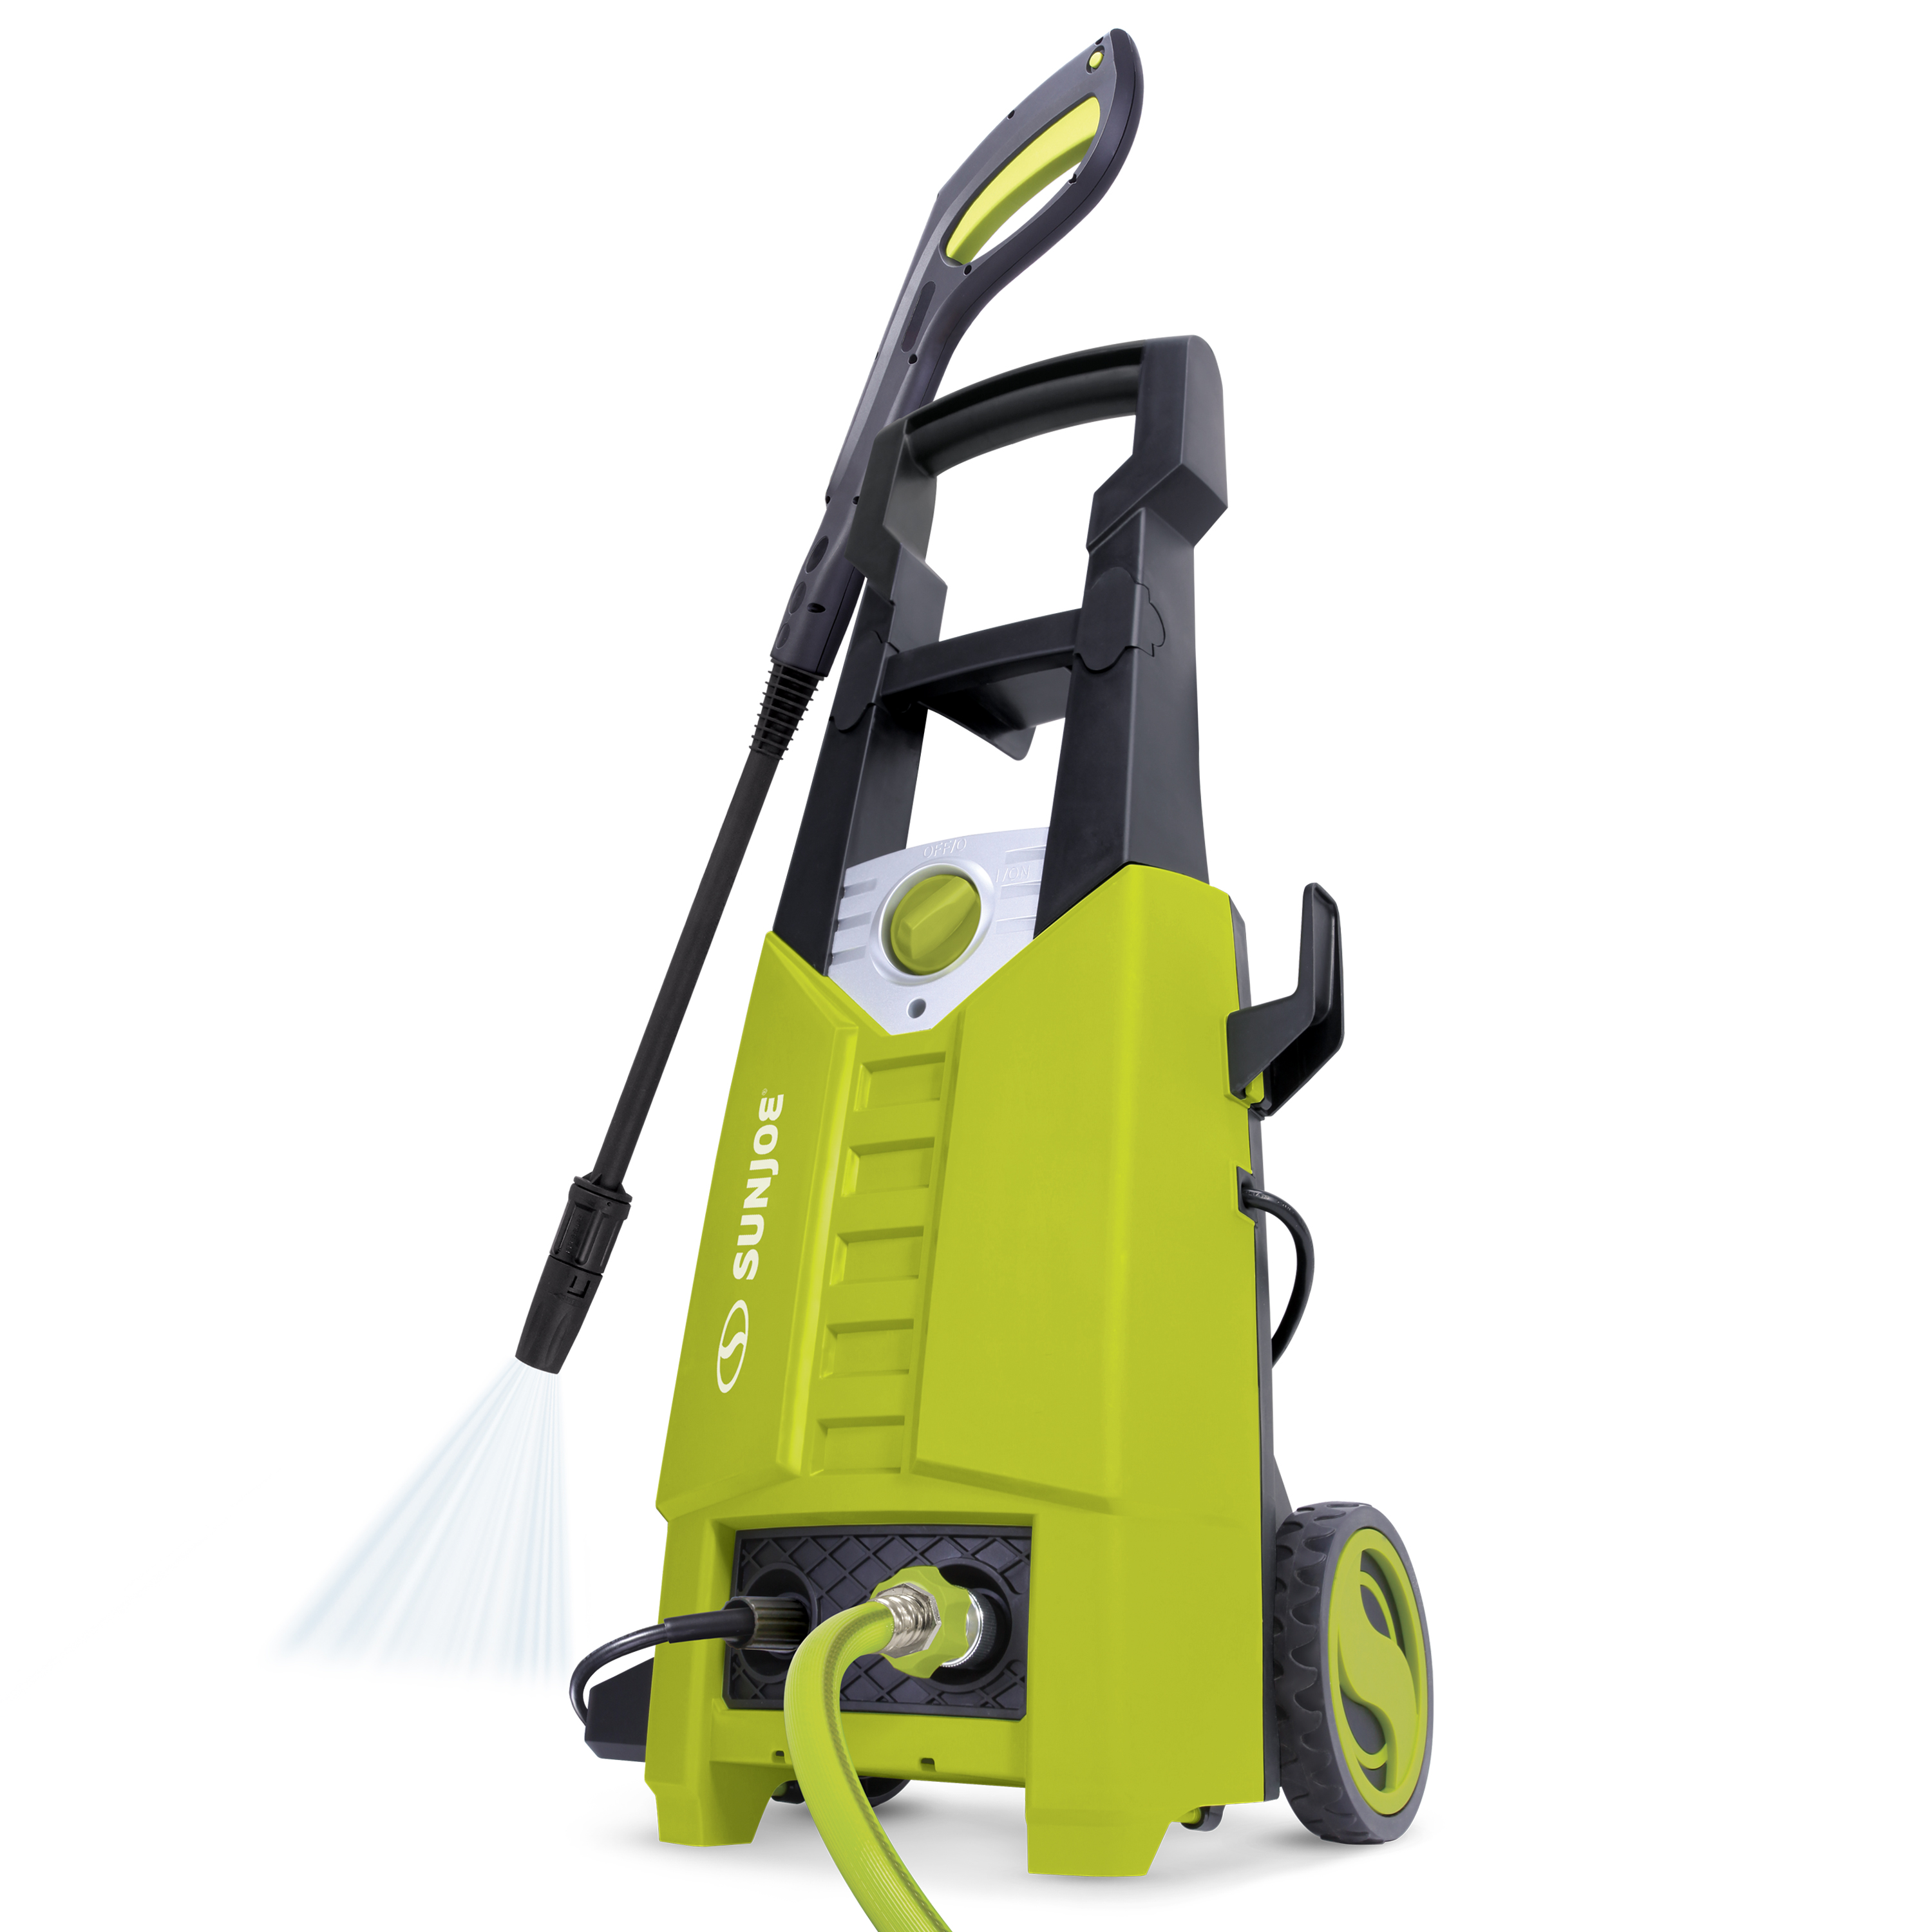 Sun Joe SPX2597 Electric Pressure Washer with Variable Control Lance, 14.5-Amp, Adjustable Wand - image 3 of 6